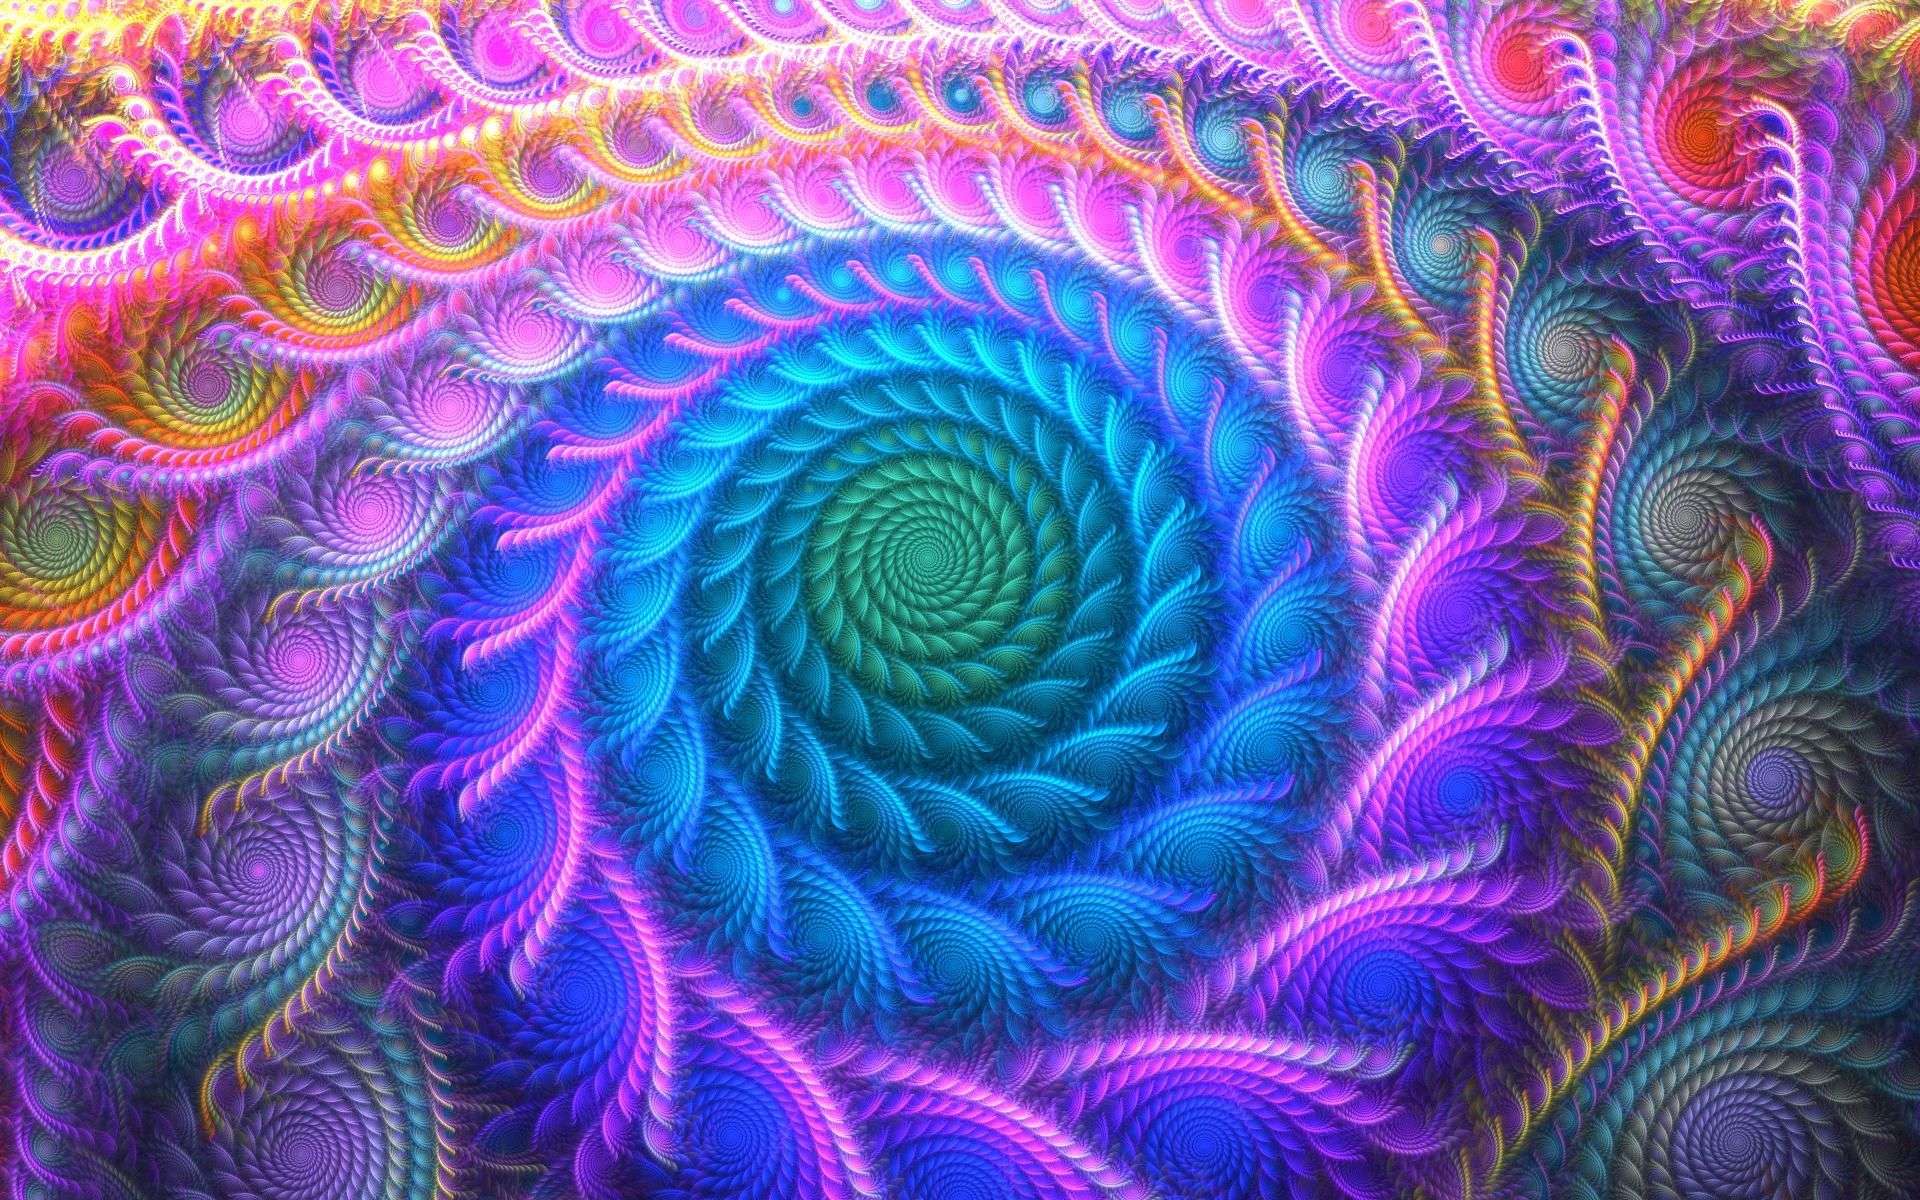 Free Download Acid Trip Hd Wallpapers New Best Collection Of Acid Images, Photos, Reviews